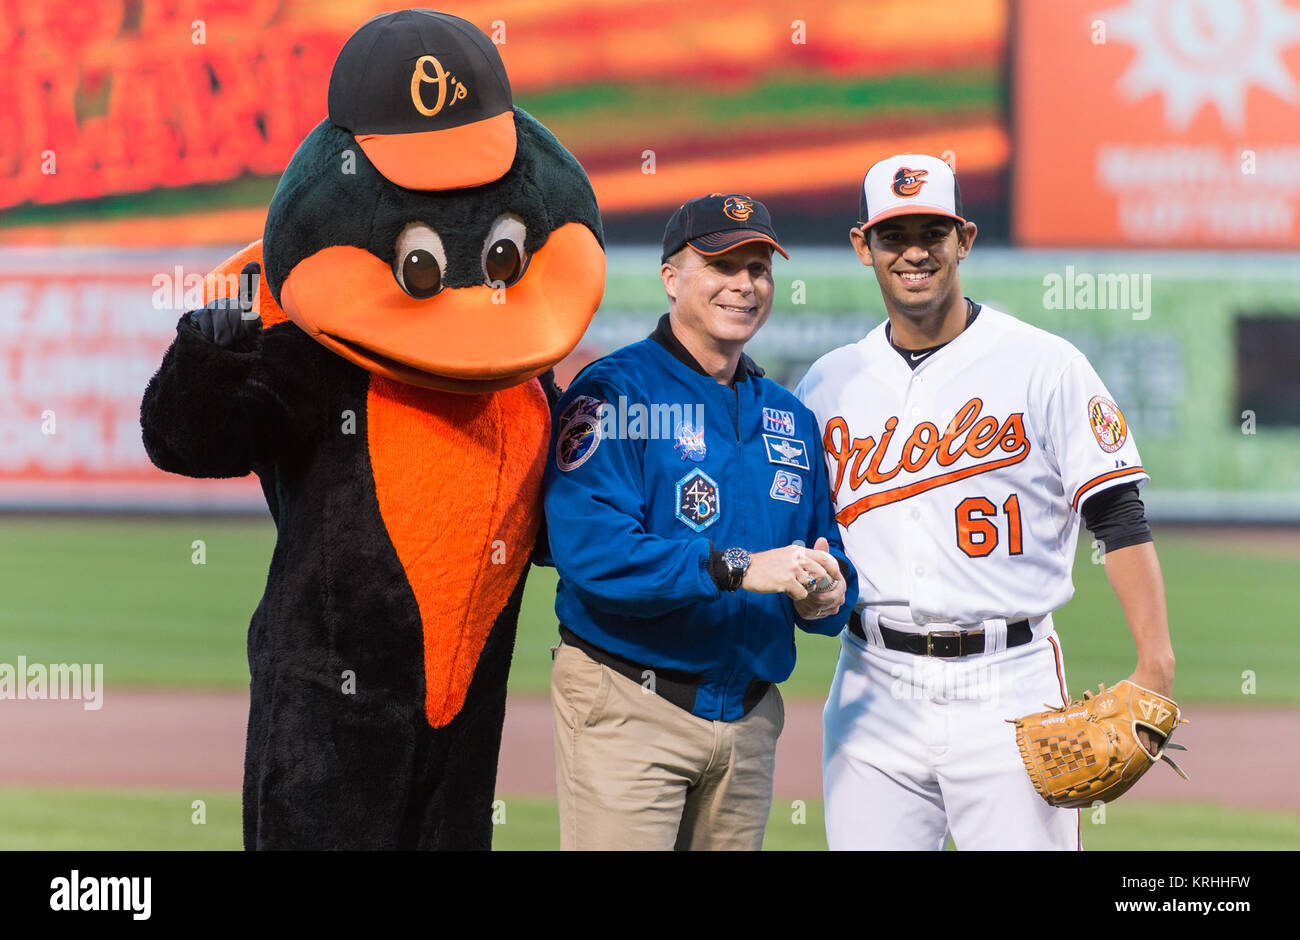 NASA astronaut and Maryland native, Terry Virts, center, poses for a picture with the Baltimore Orioles mascot, left, and Orioles pitcher Jason Garcia, right, after throwing the ceremonial first pitch before the Boston Red Sox take on the Baltimore Orioles at Camden Yards in Baltimore, Md. on Monday, September 14, 2015.  Virts spend 199 days aboard the International Space Station from November 2014 to June 2015 as part of Expeditions 42 and 43, serving as commander of Expedition 43.  Photo Credit: (NASA/Joel Kowsky) Astronaut Terry Virts Orioles First Pitch (NHQ201509140020) Stock Photo